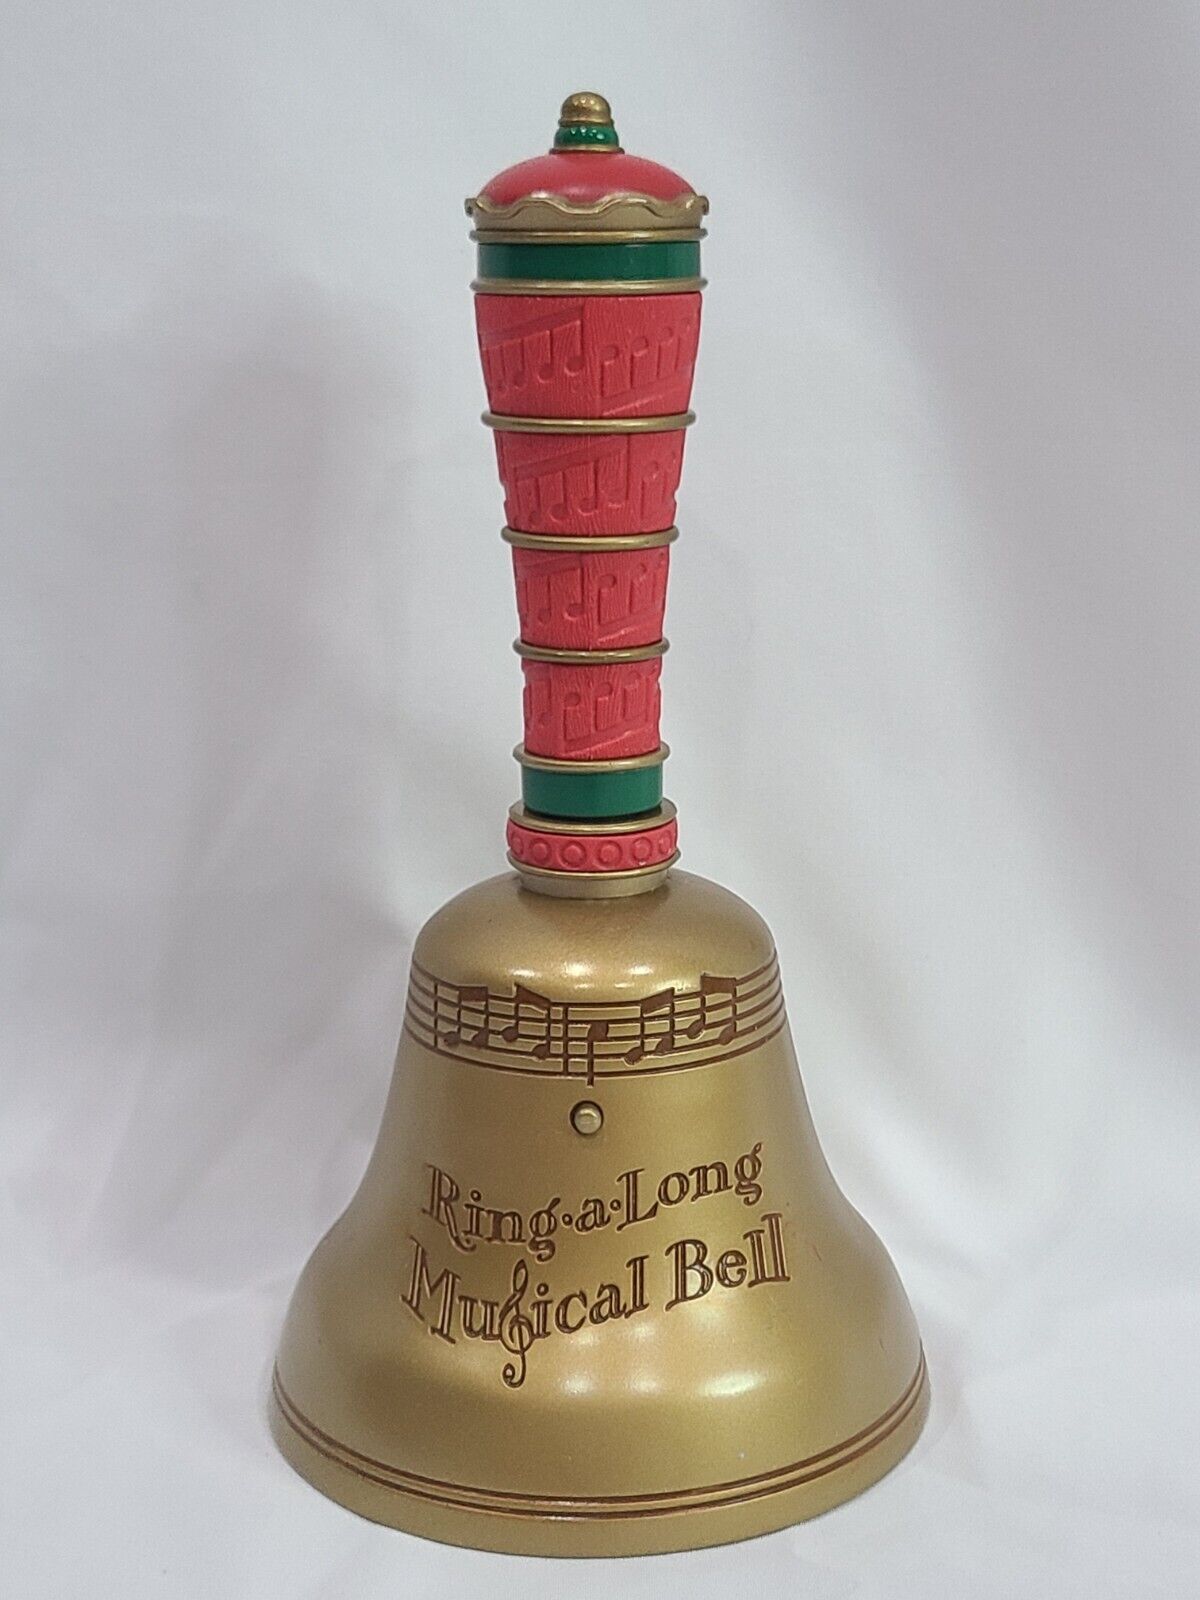 Hallmark Ring-a-Long Musical Bell with 5 Different Christmas Songs - Works